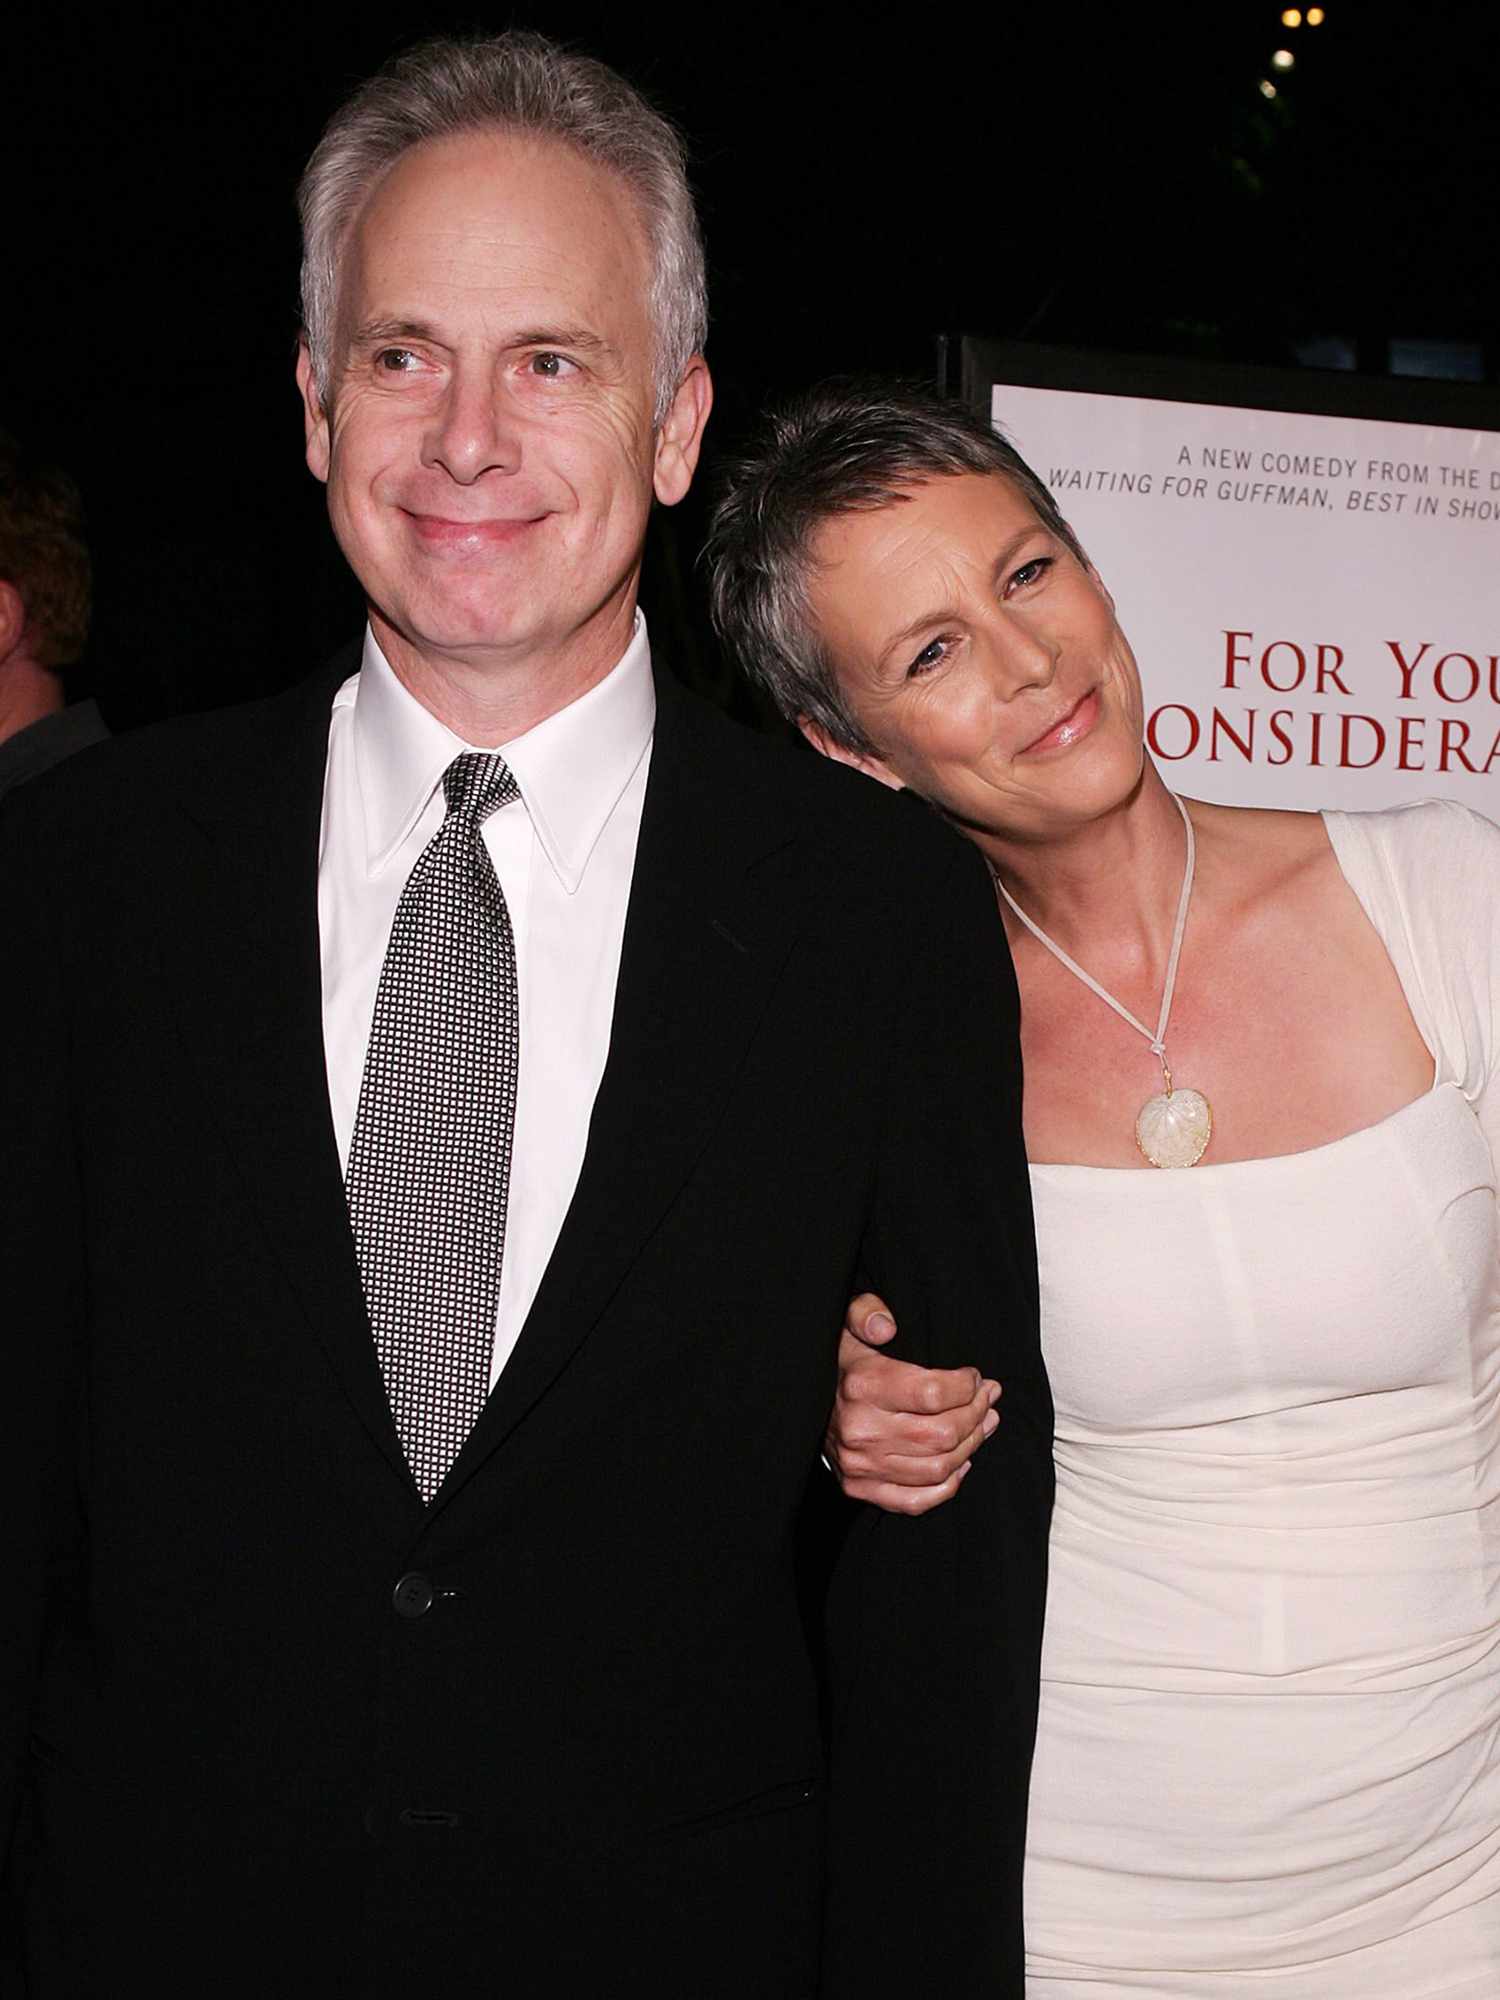 Christopher Guest and Jamie Lee Curtis attend the Los Angeles premiere of "For Your Consideration" on November 13, 2006 in Los Angeles, California.